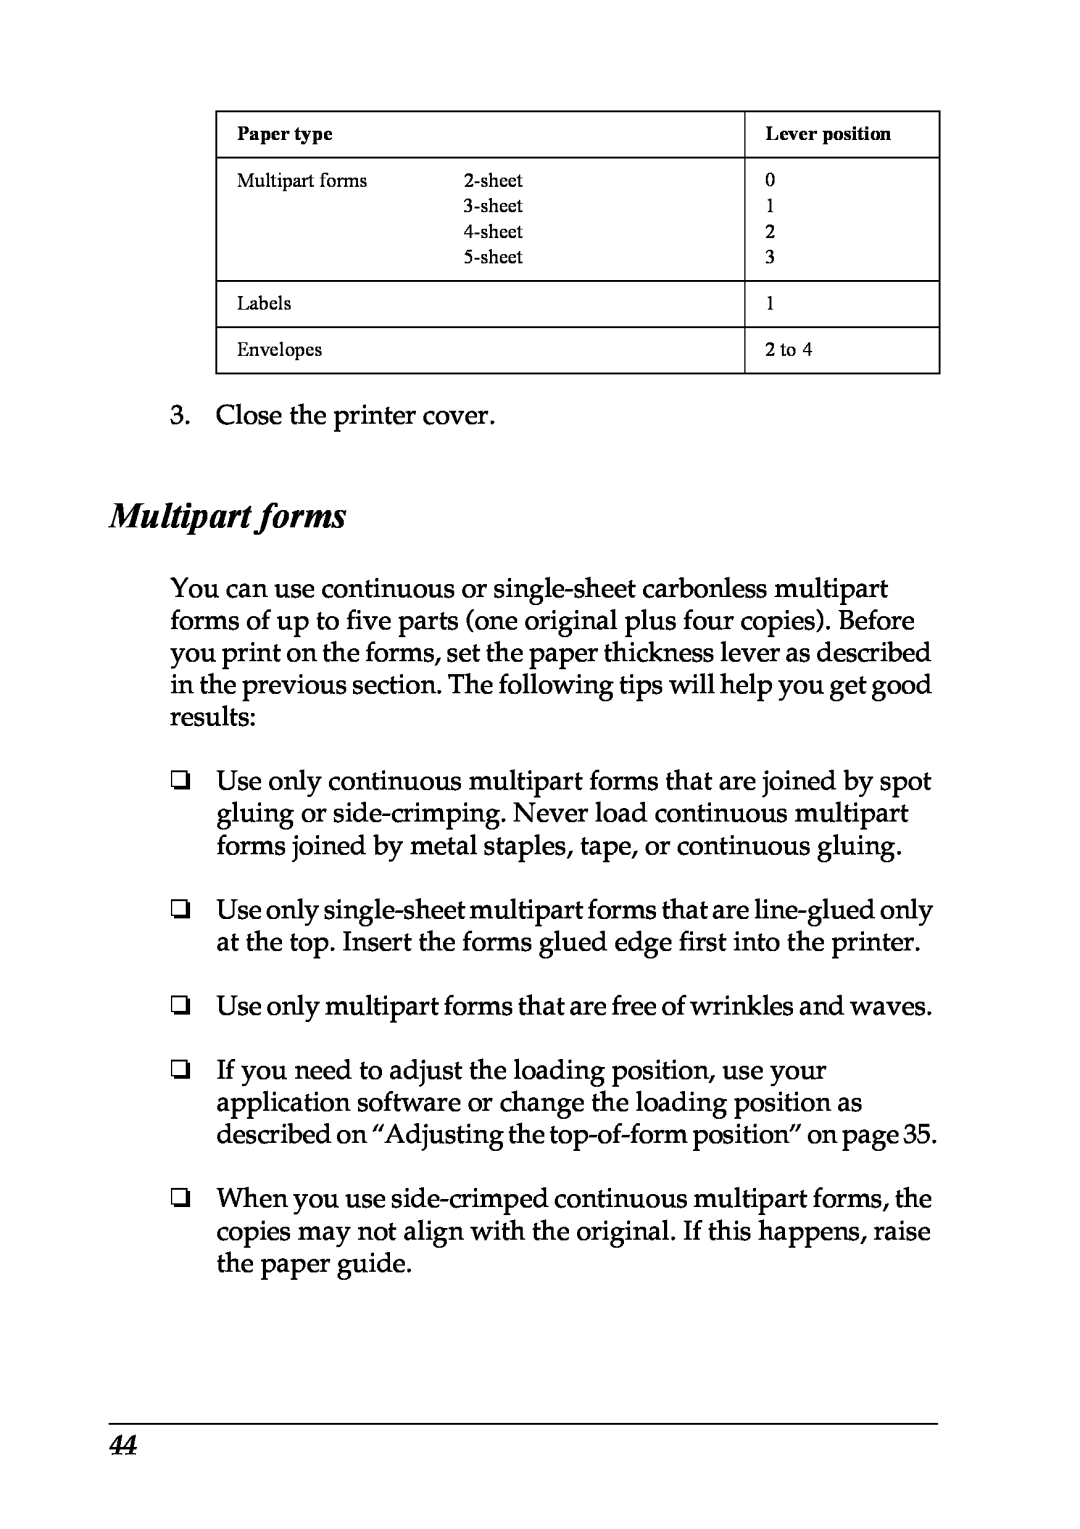 Epson LX-1170 manual Multipart forms 